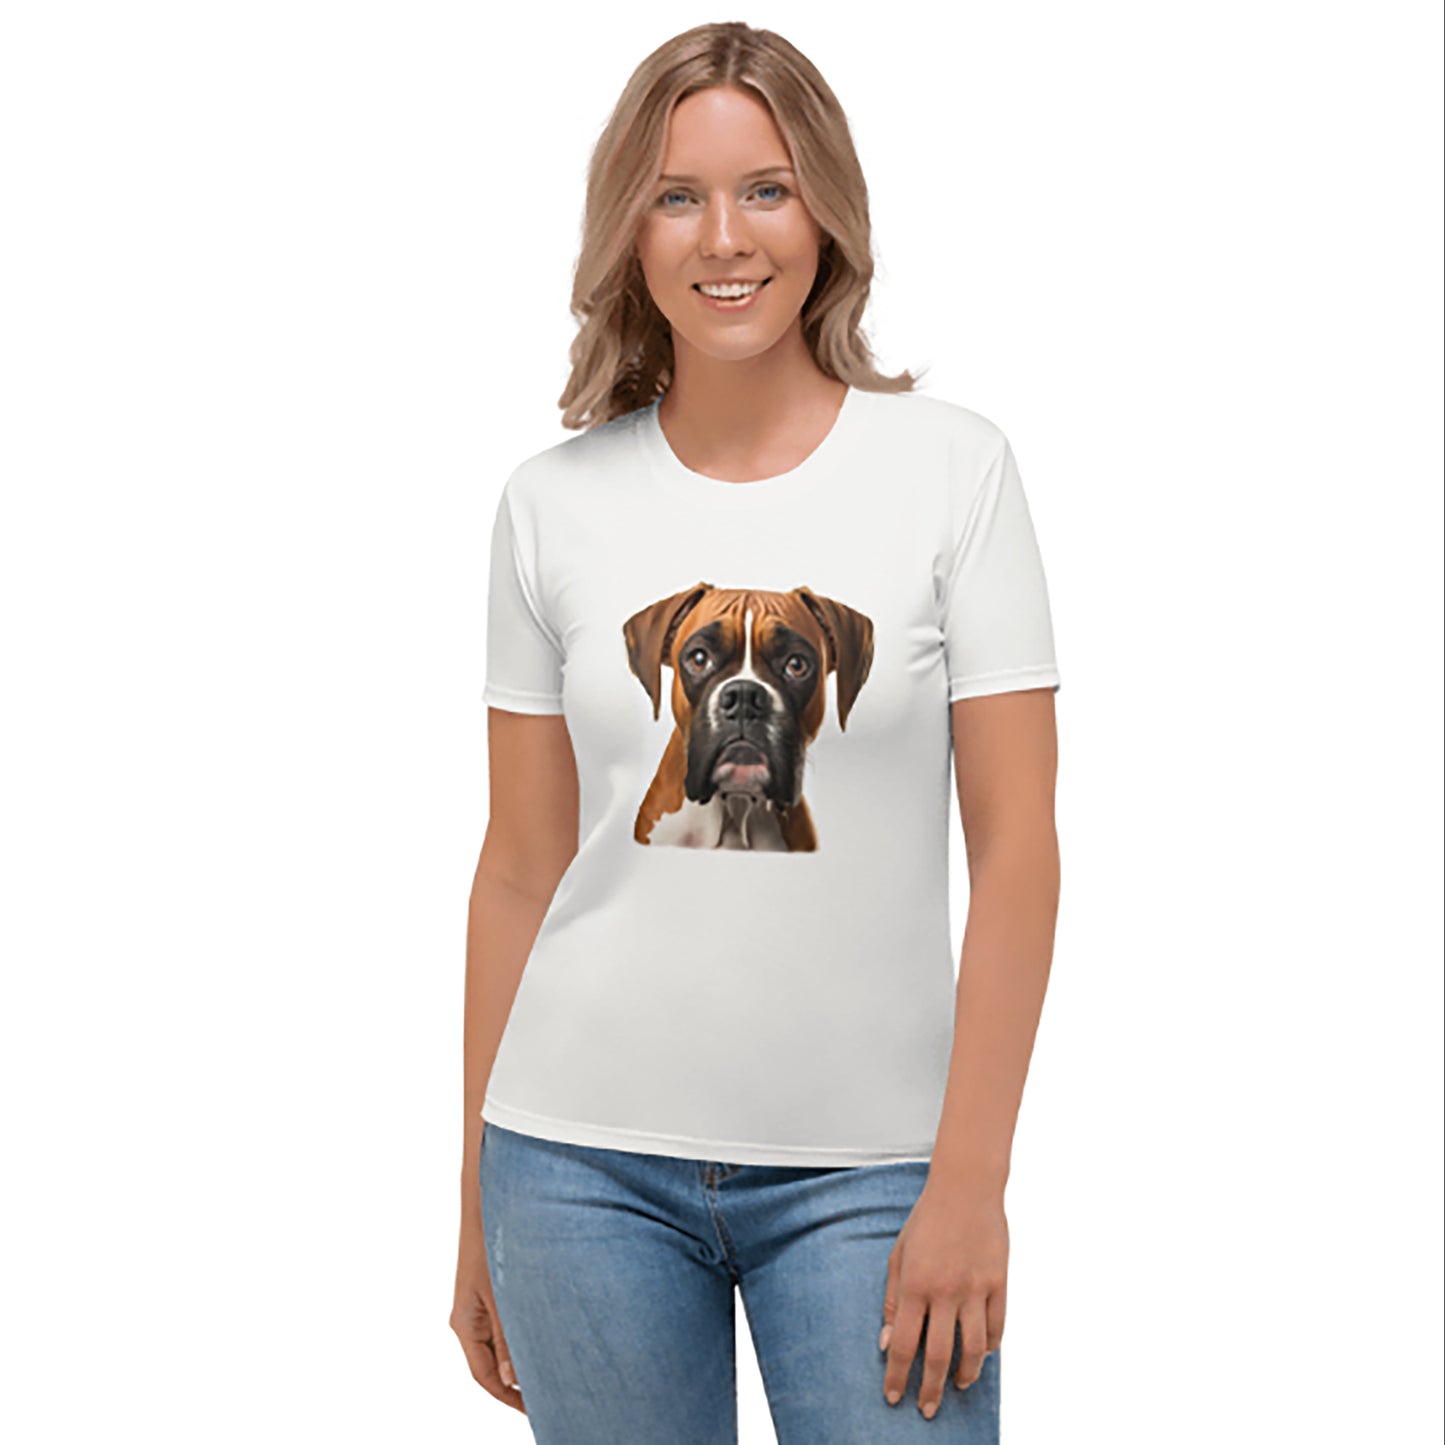 Women and Men's (Unisex) T-Shirt printed with a Boxer Dog